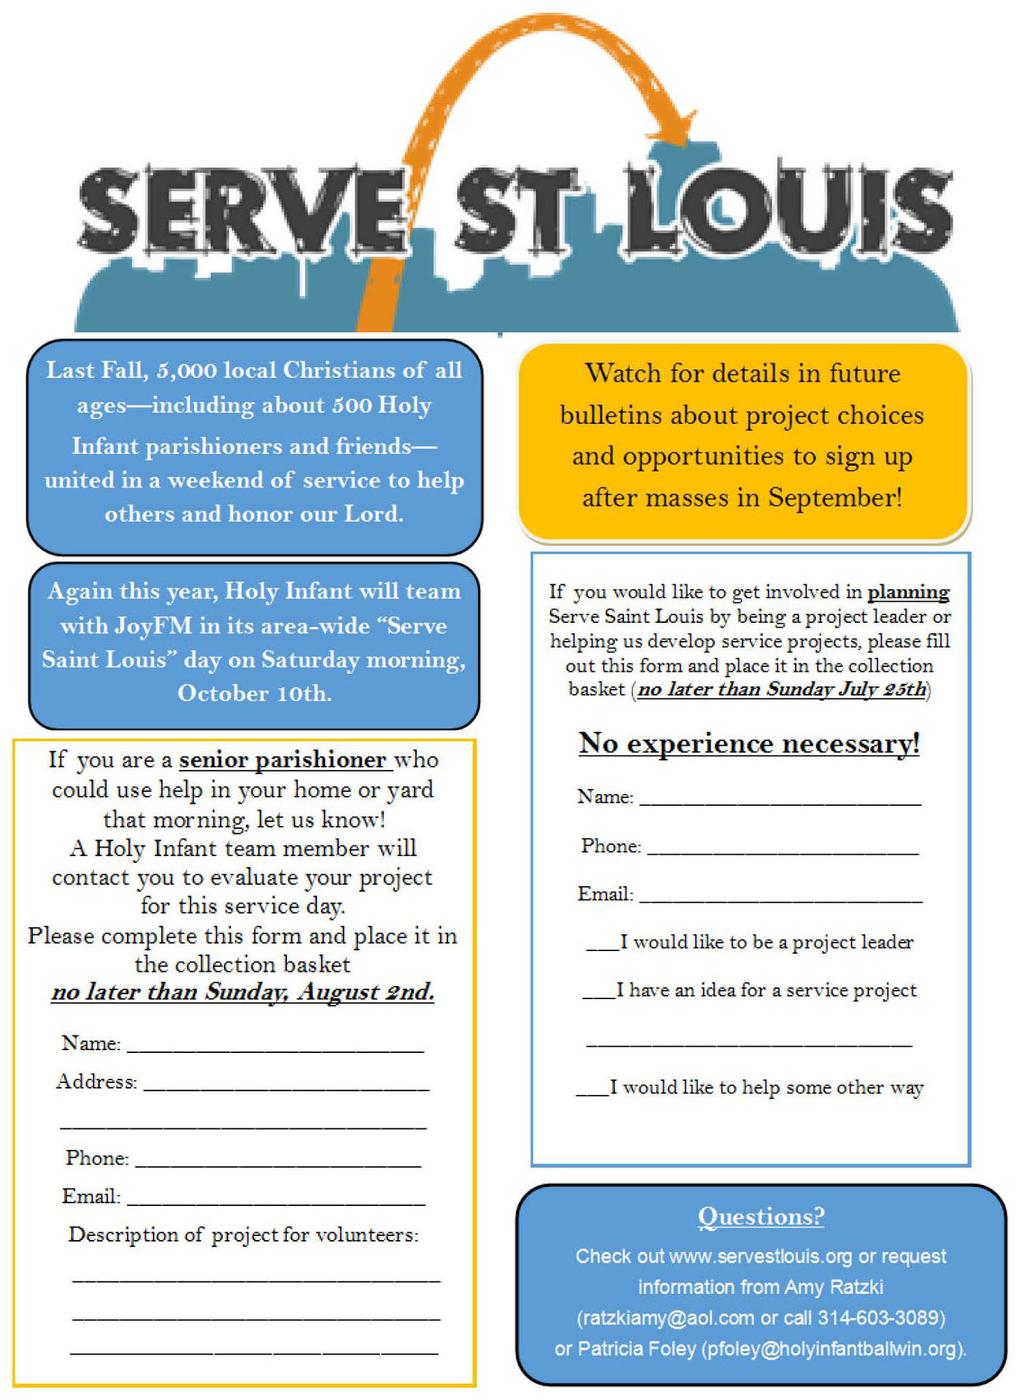 If you would like to get involved in planning Serve Saint